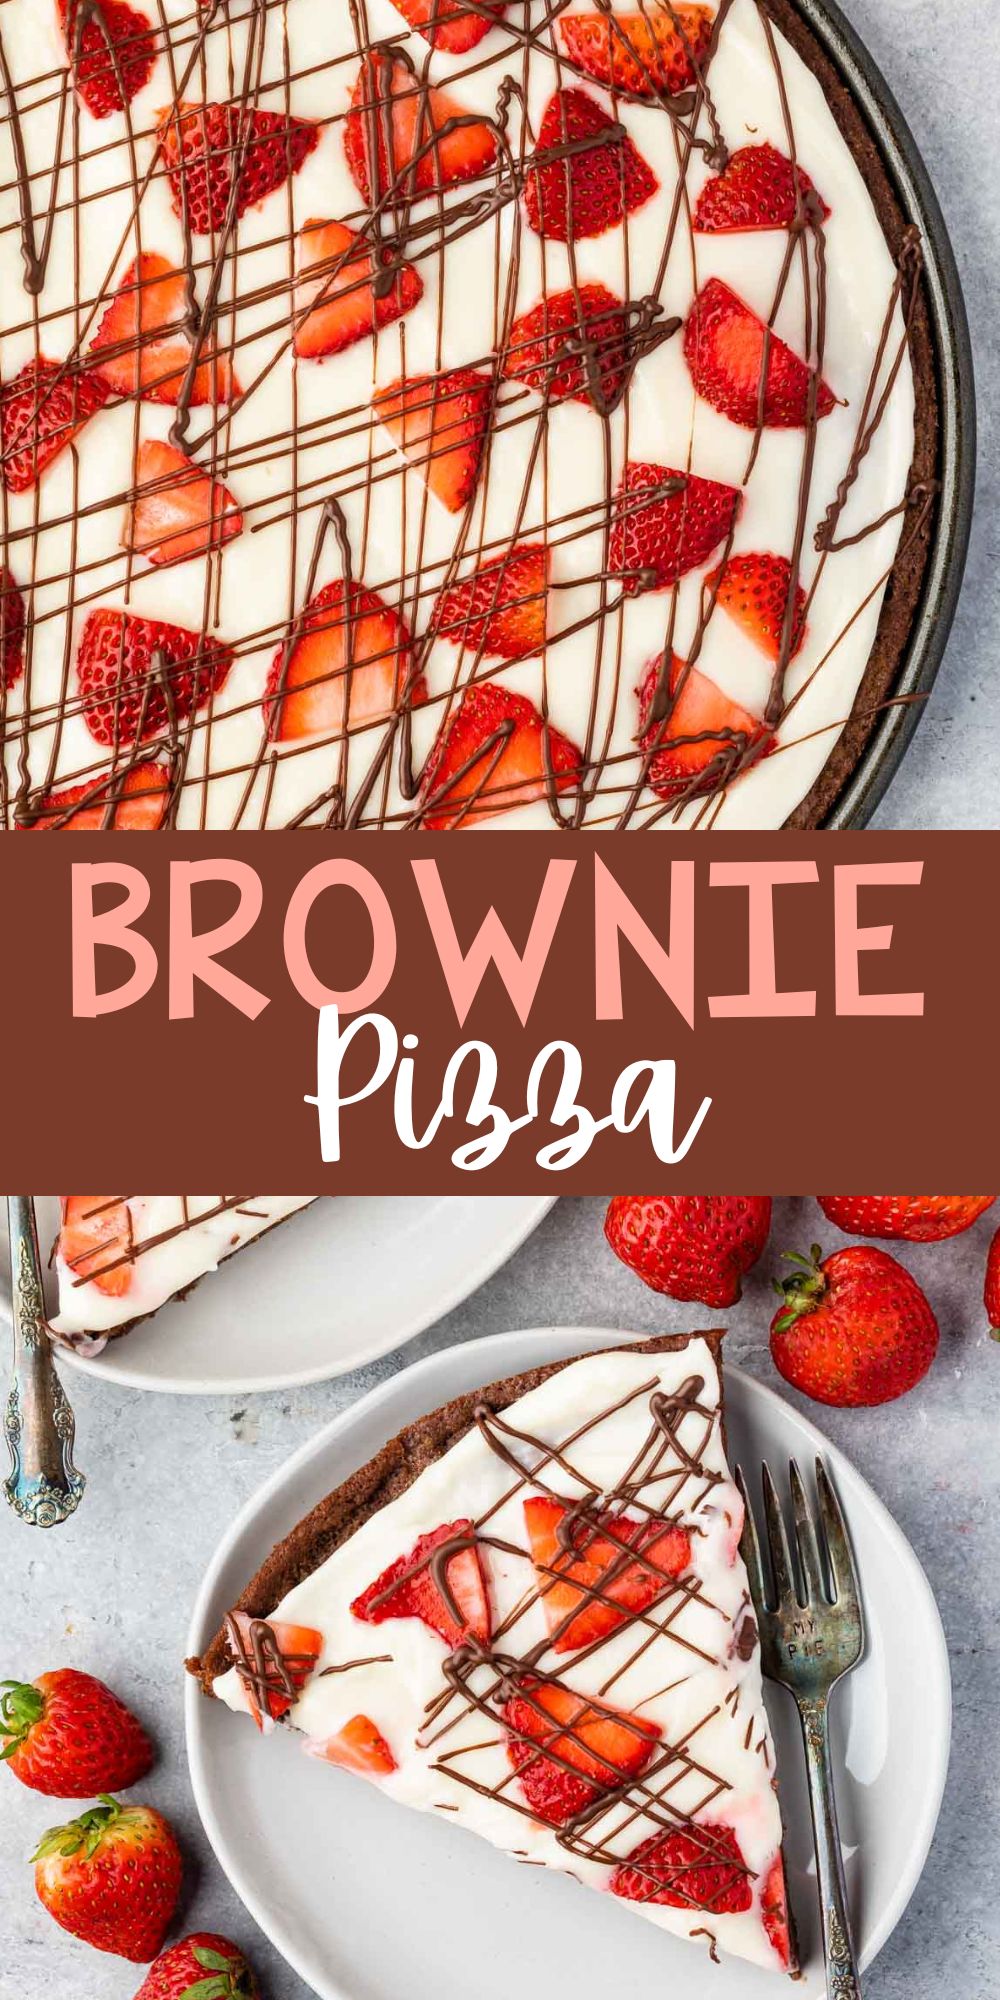 two photos of brownie in the shape of a pizza topped with frosting and chocolate sauce and strawberries with words on the image.